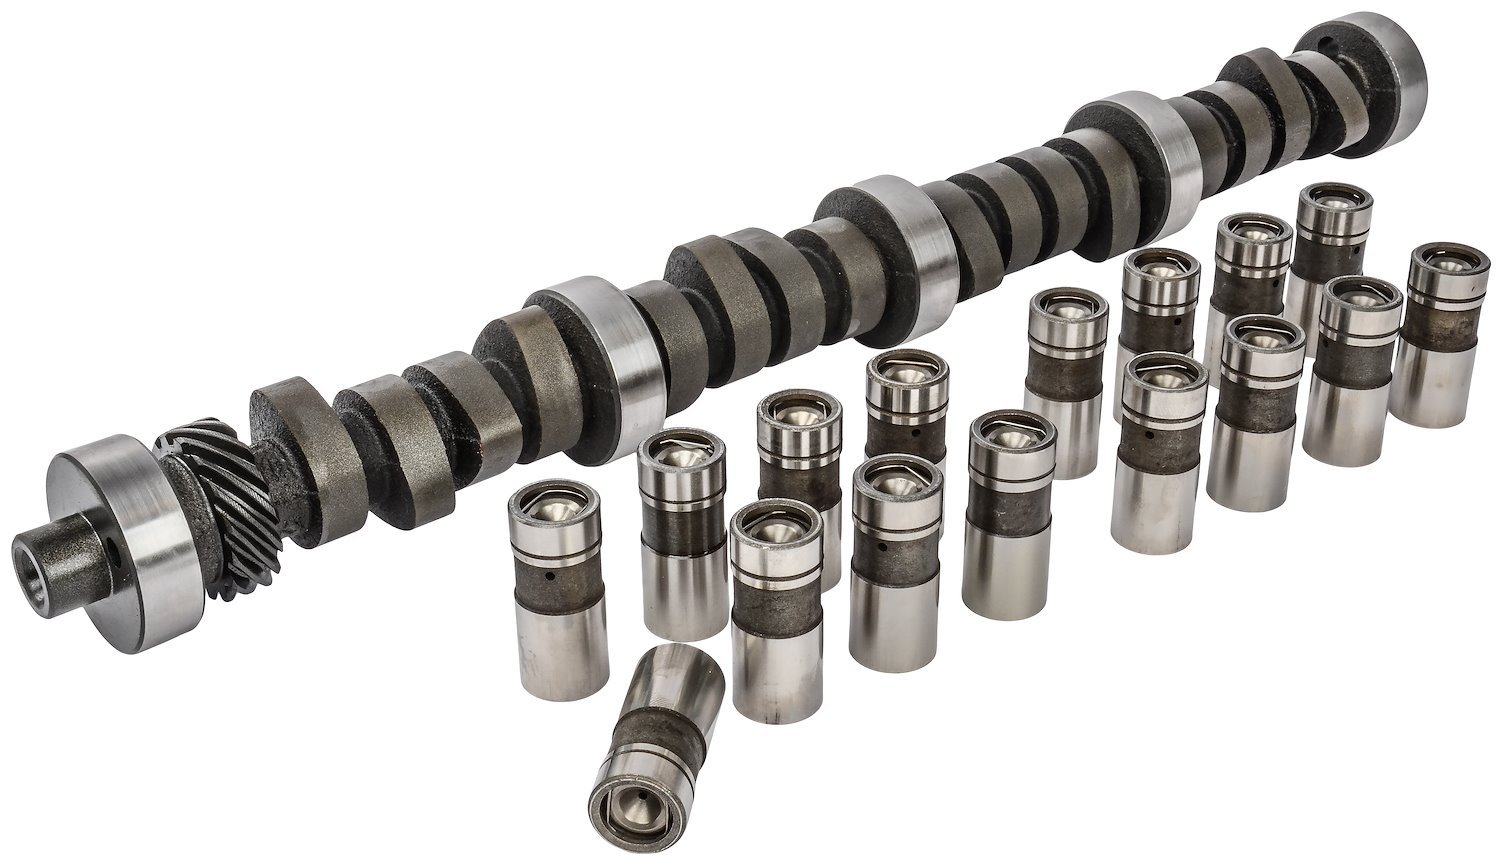 Hydraulic Flat Tappet Camshaft & Lifters for 1969-1985 Ford 351W